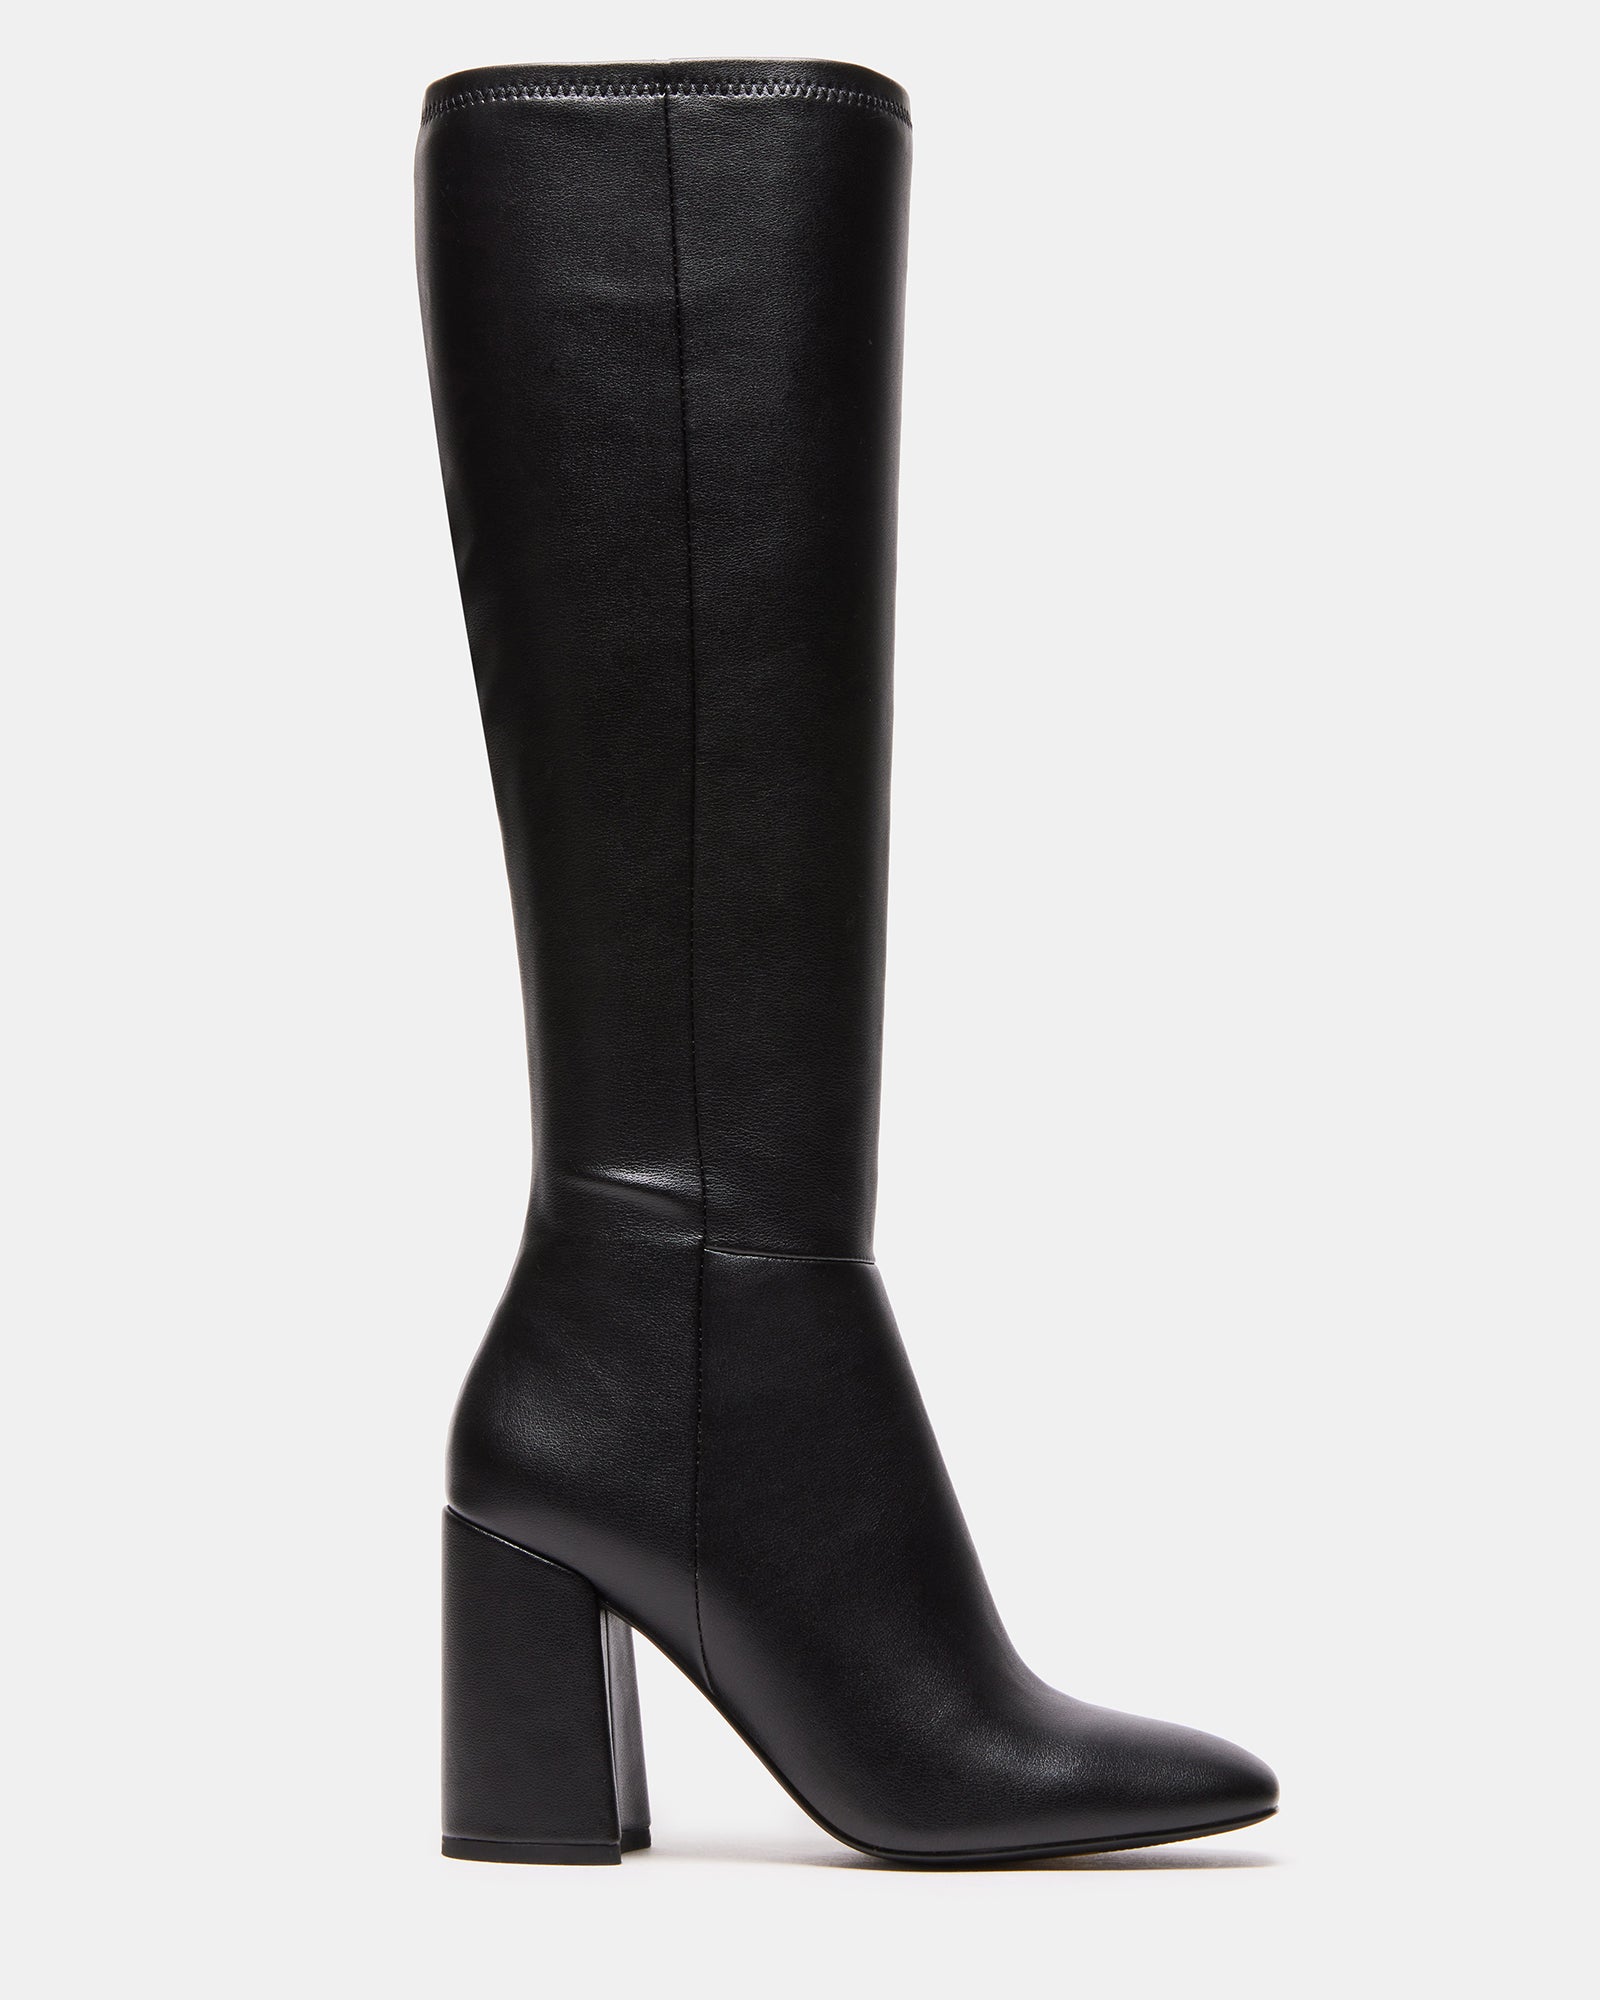 Stylish Thigh-High Boots For Women At Any Heel Height